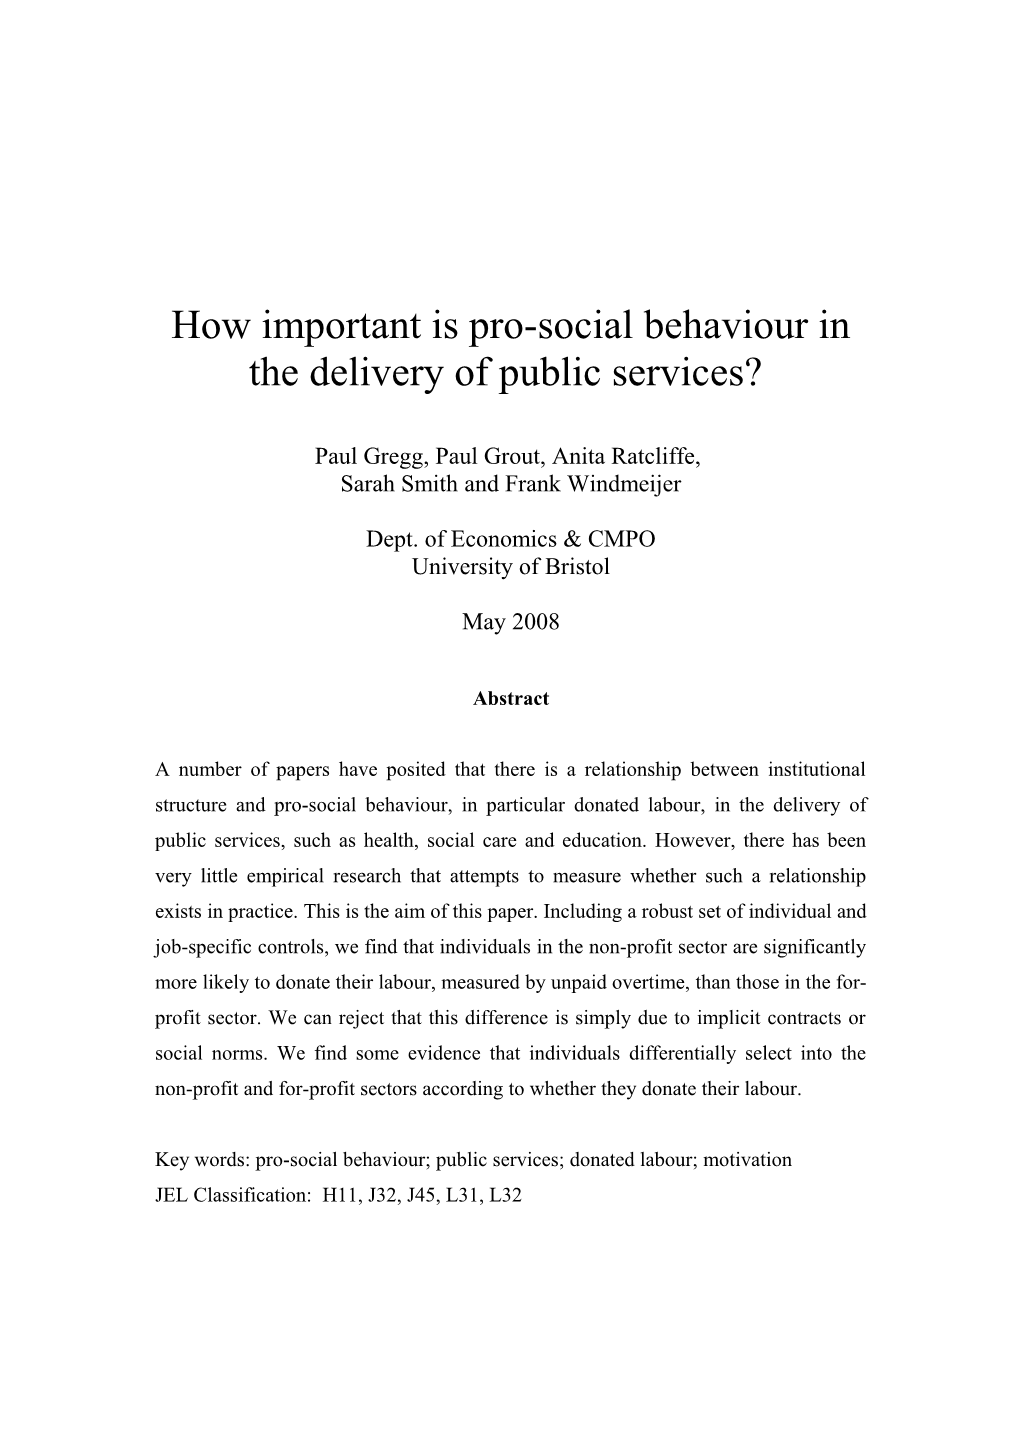 How Important Is Pro-Social Behaviour in the Delivery of Public Services?